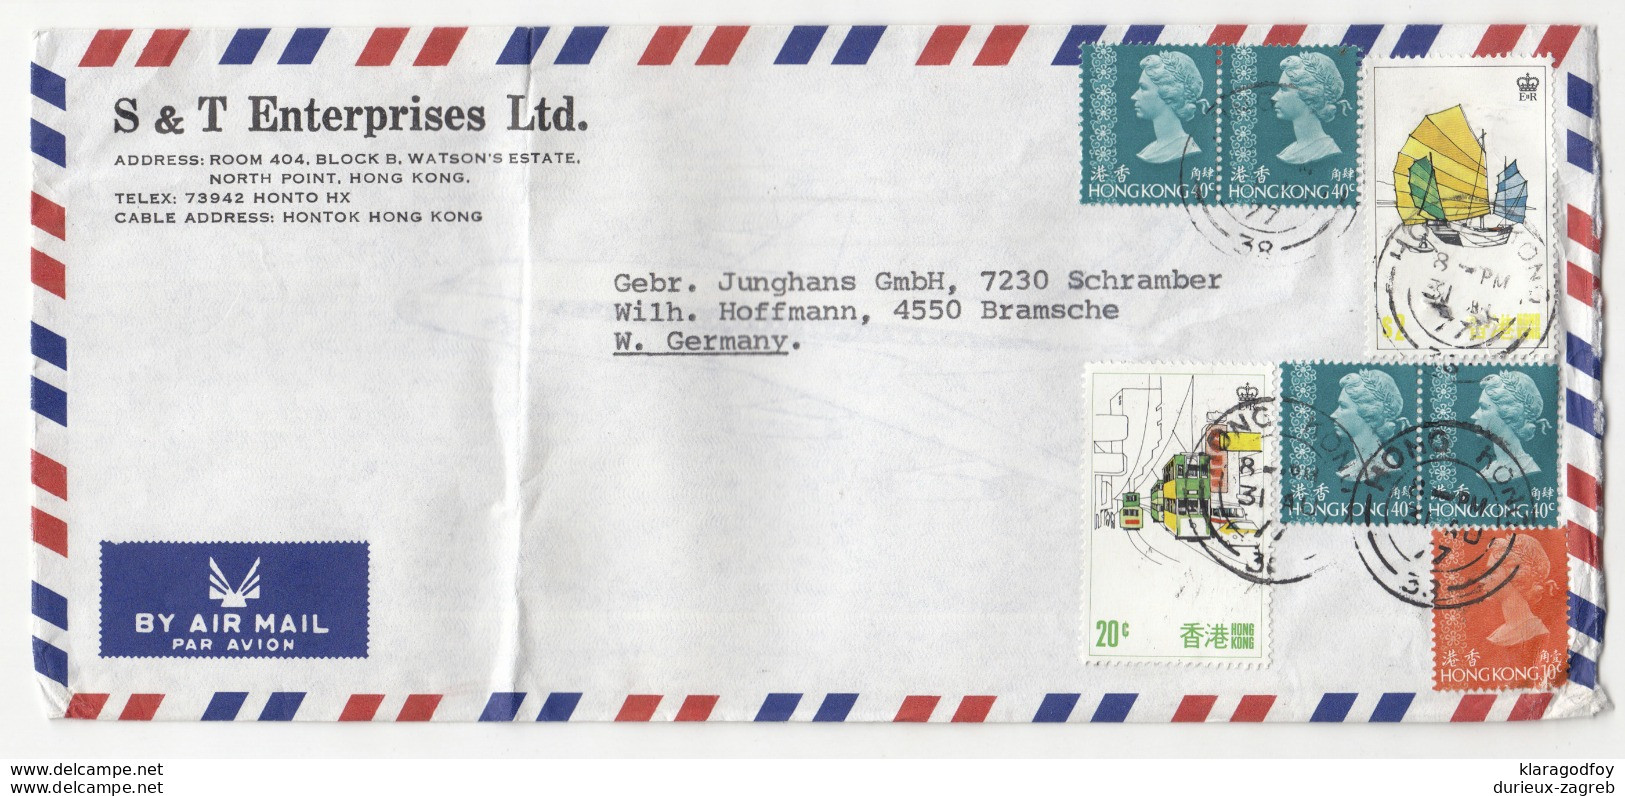 S & T Enterprises Company Air Mail Letter Cover Travelled 1977 To Germany B190922 - Covers & Documents